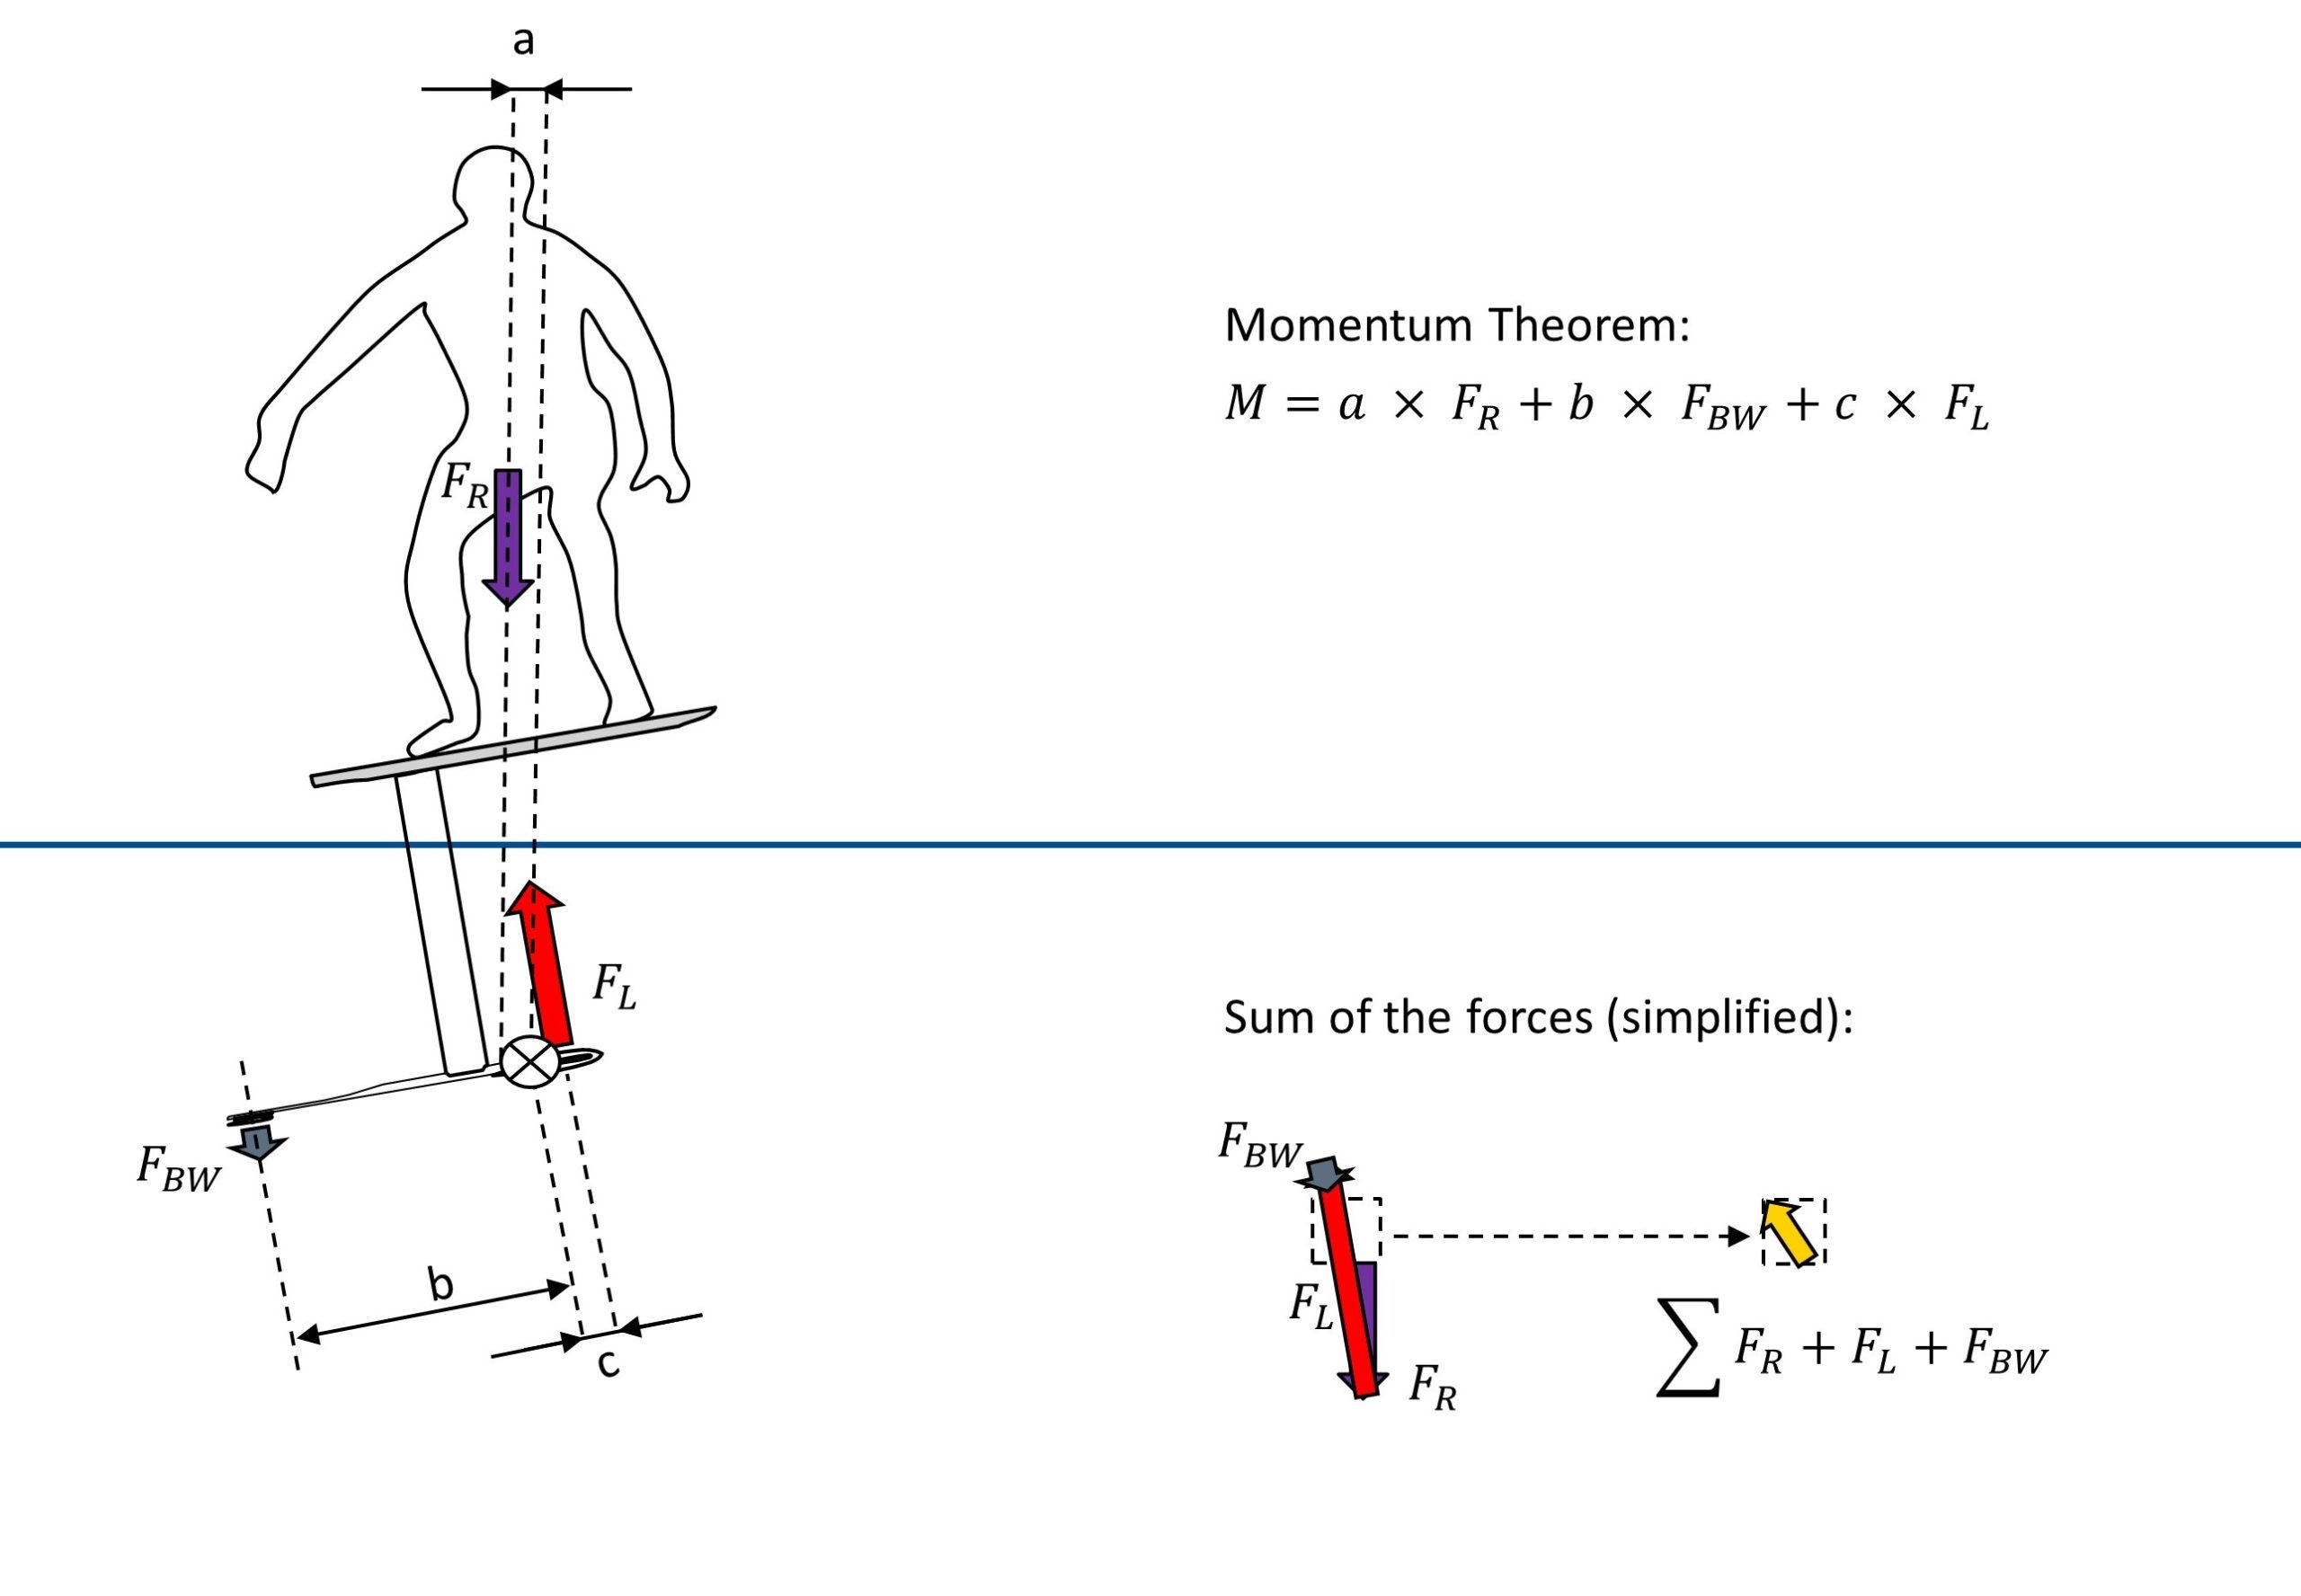 Forces and Torsional Moment